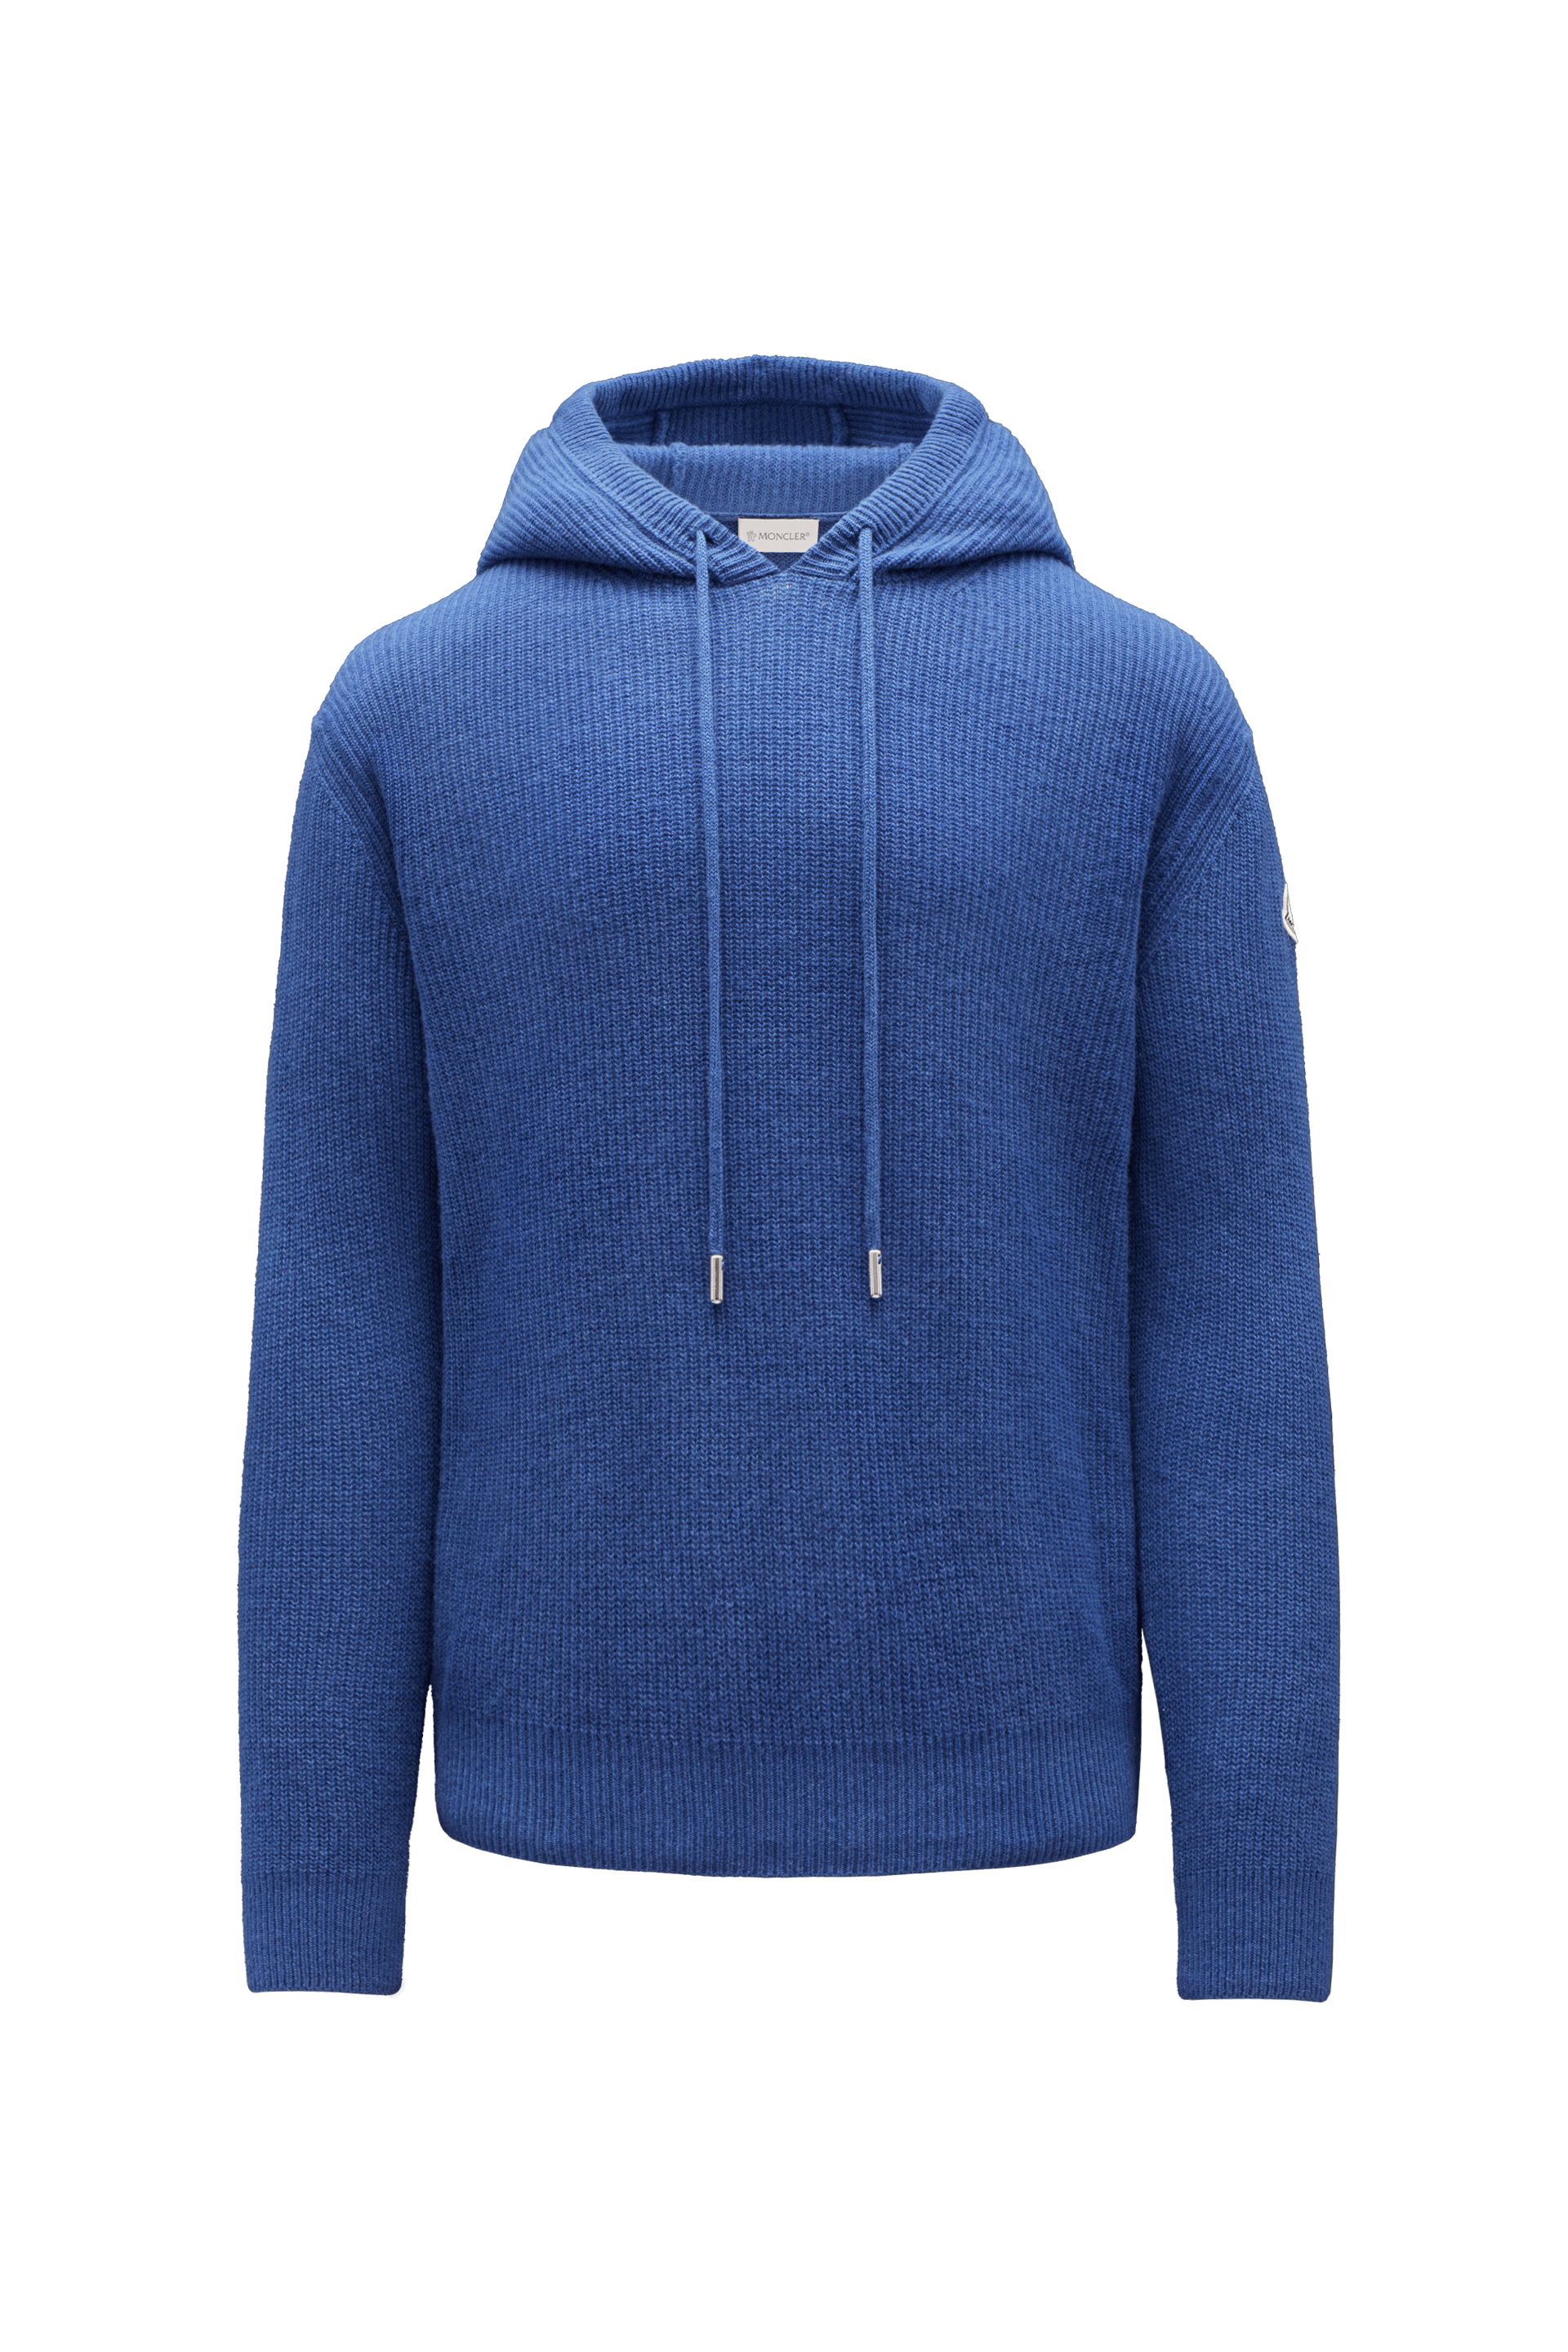 Moncler Collection Wool & Cashmere Hoodie, Men, Blue, Size: Xxl